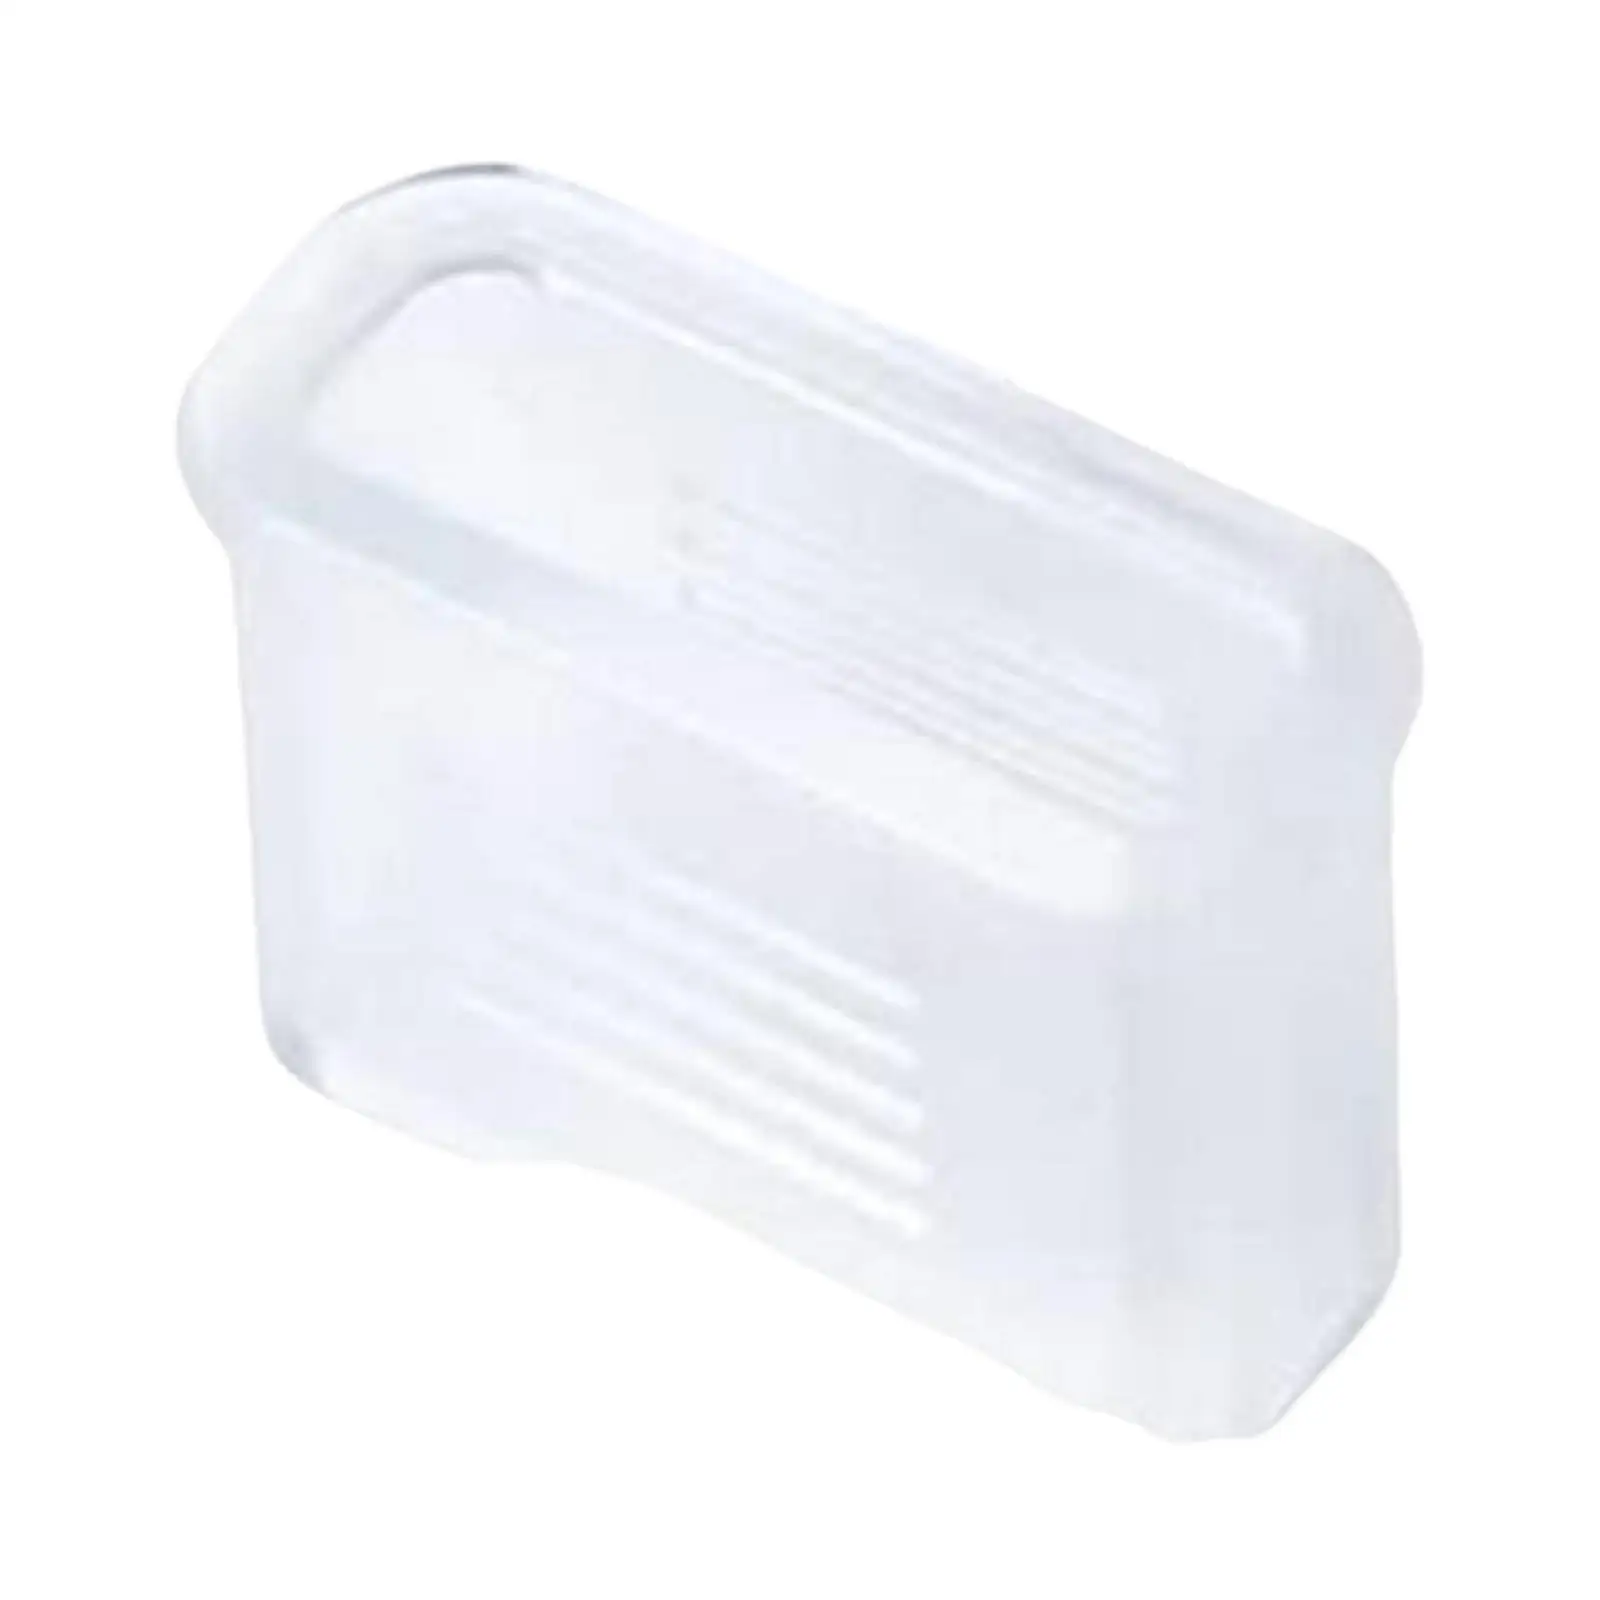 Histle Mouth Cover Protector White Mouth Piece PVC Whistle Mouth Protector for